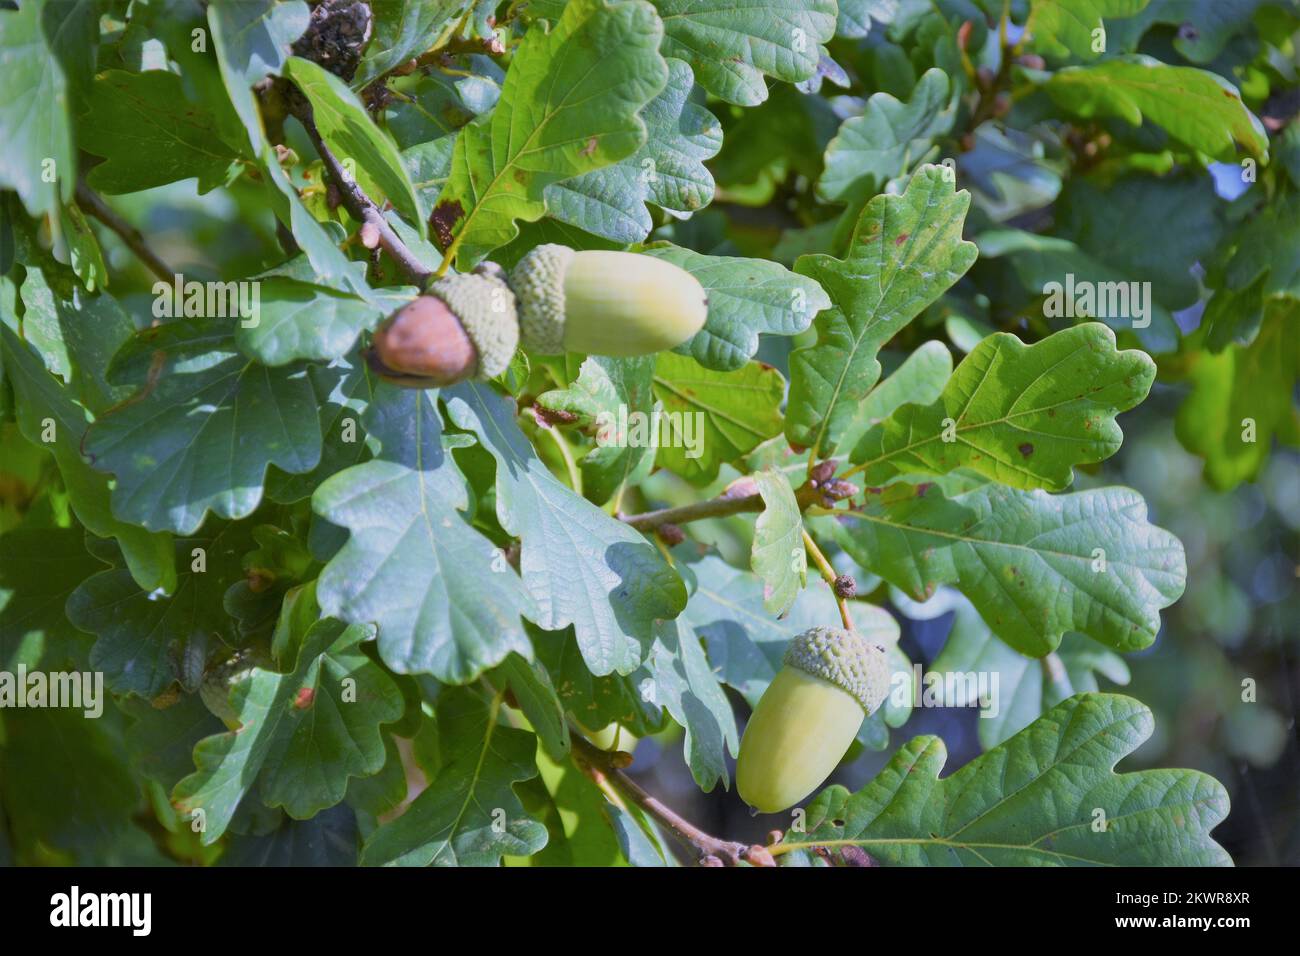 Oak tree leaves and acorns, summer, countryside Stock Photo